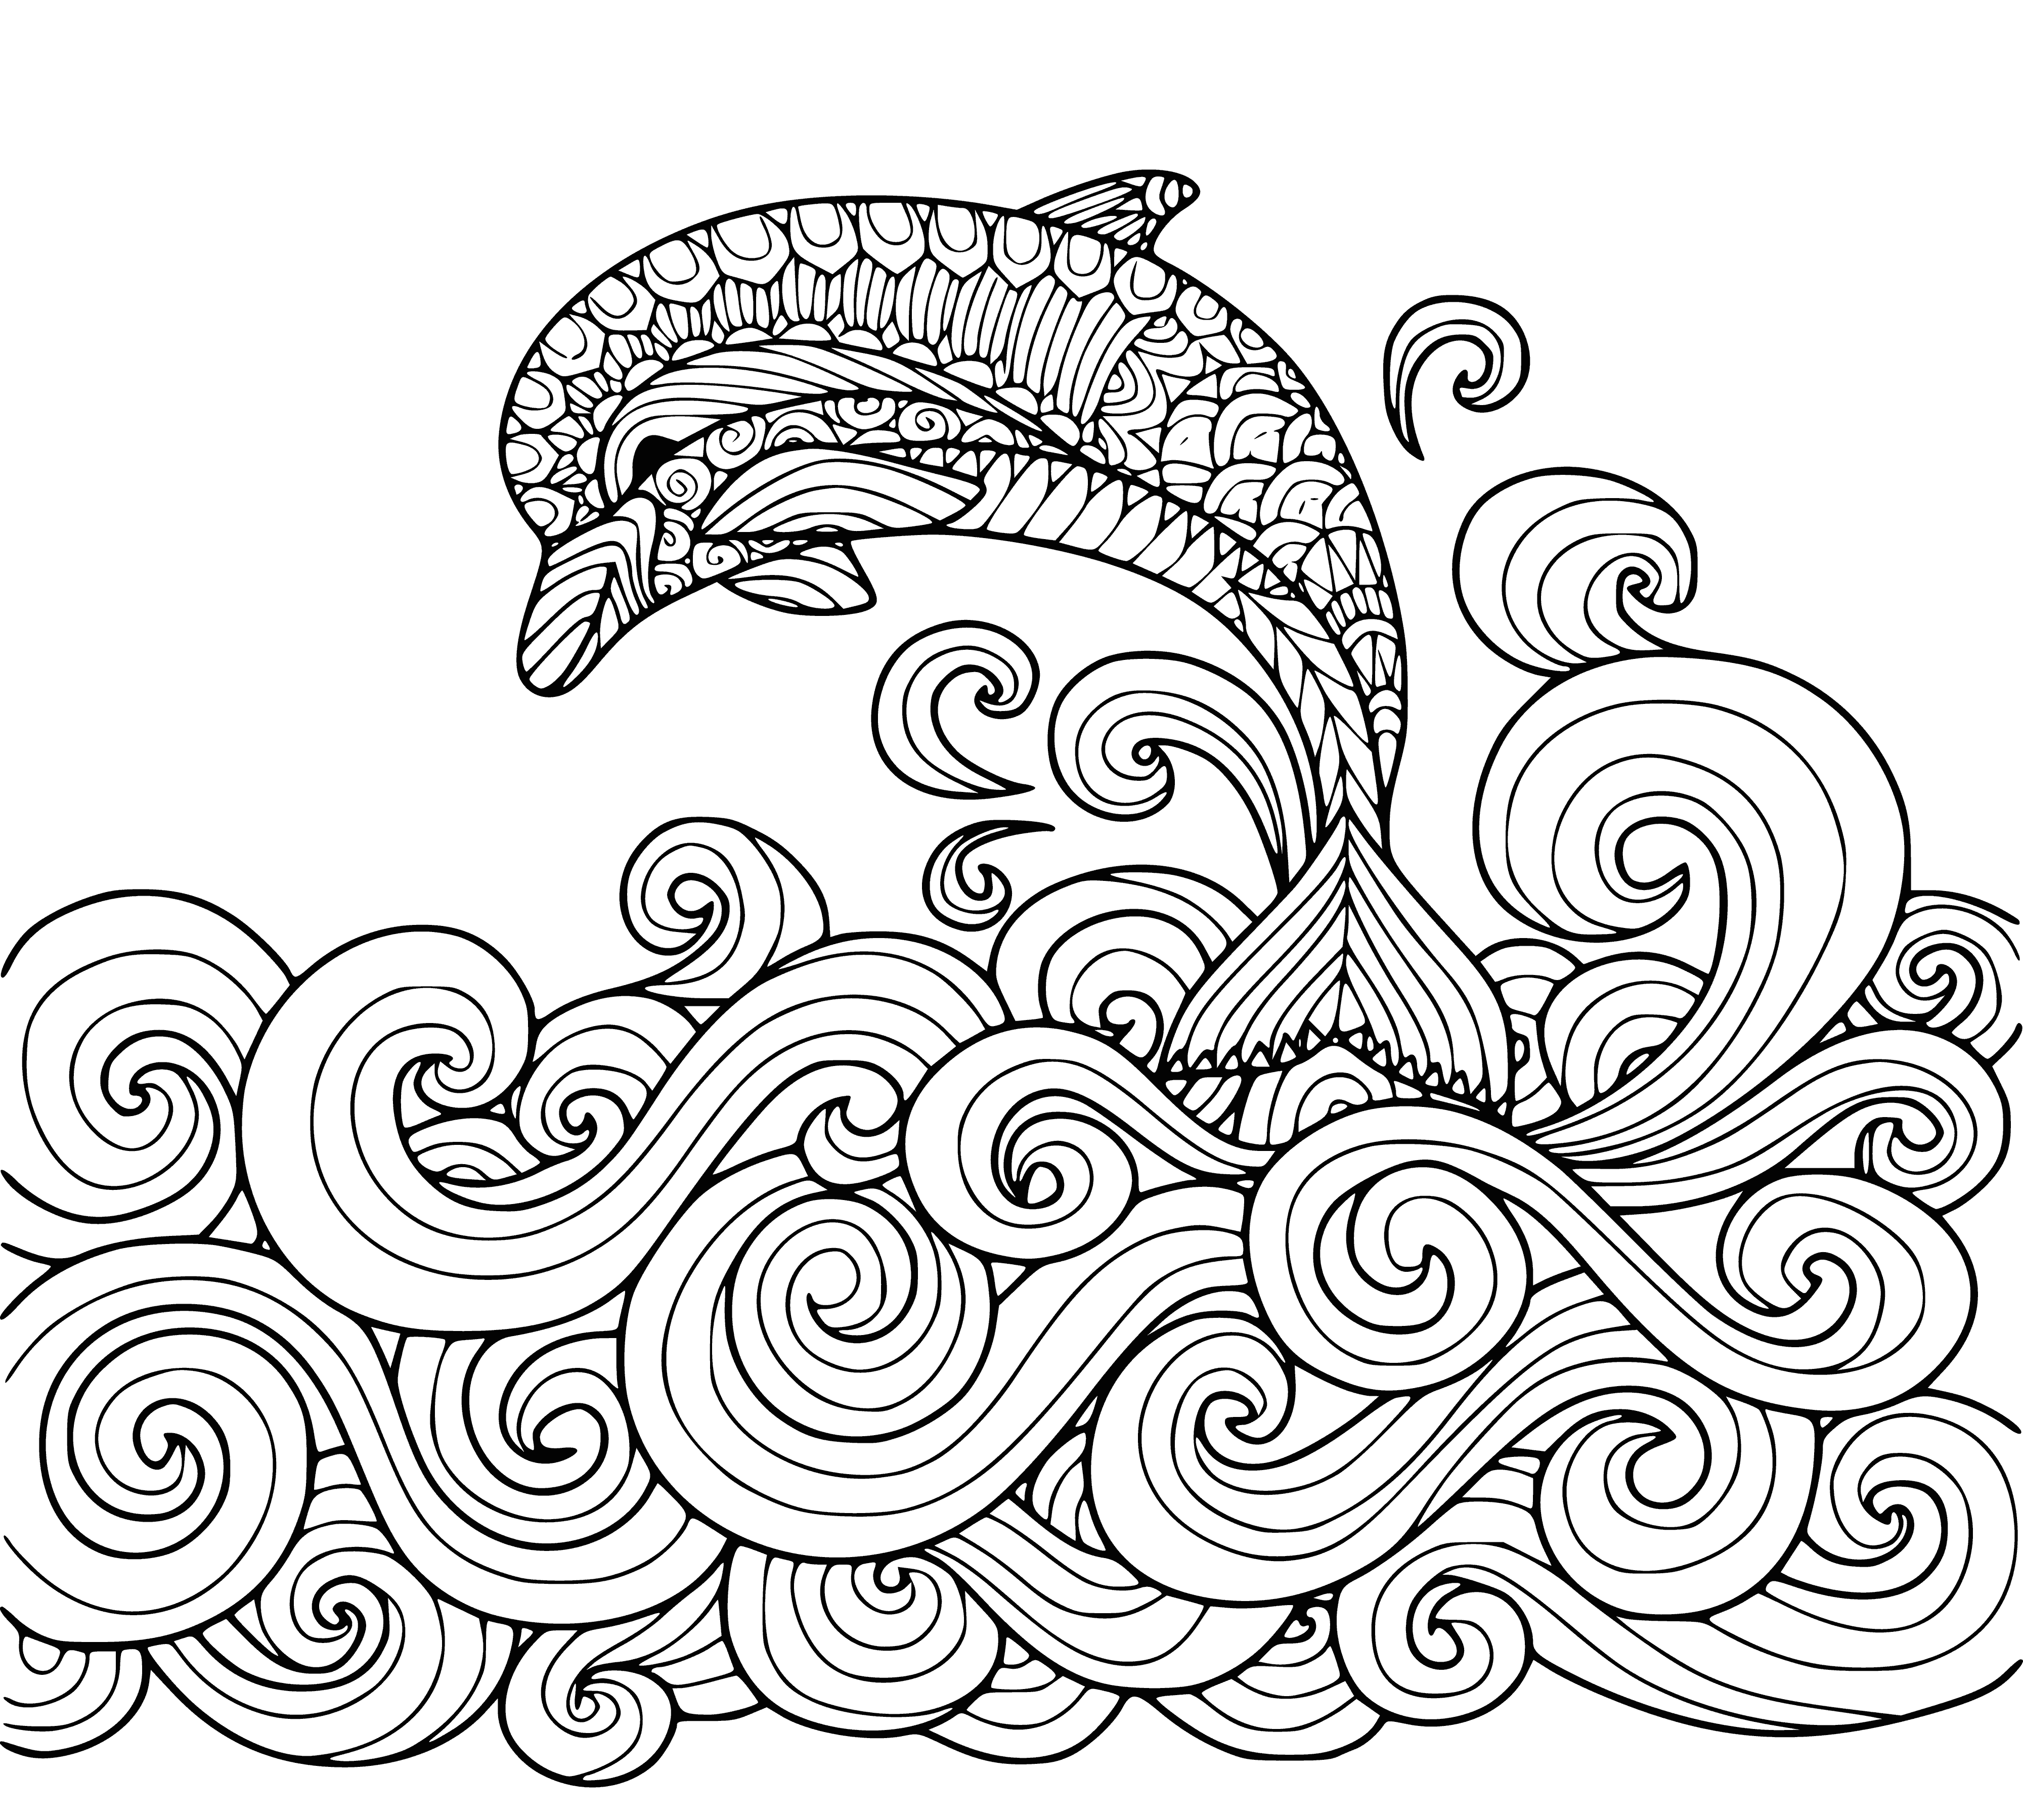 coloring page: Dolphin gracefully leaps, sun shining on deep blue ocean & sky, beautiful gray with white belly + fins, long curved beak, black eyes.